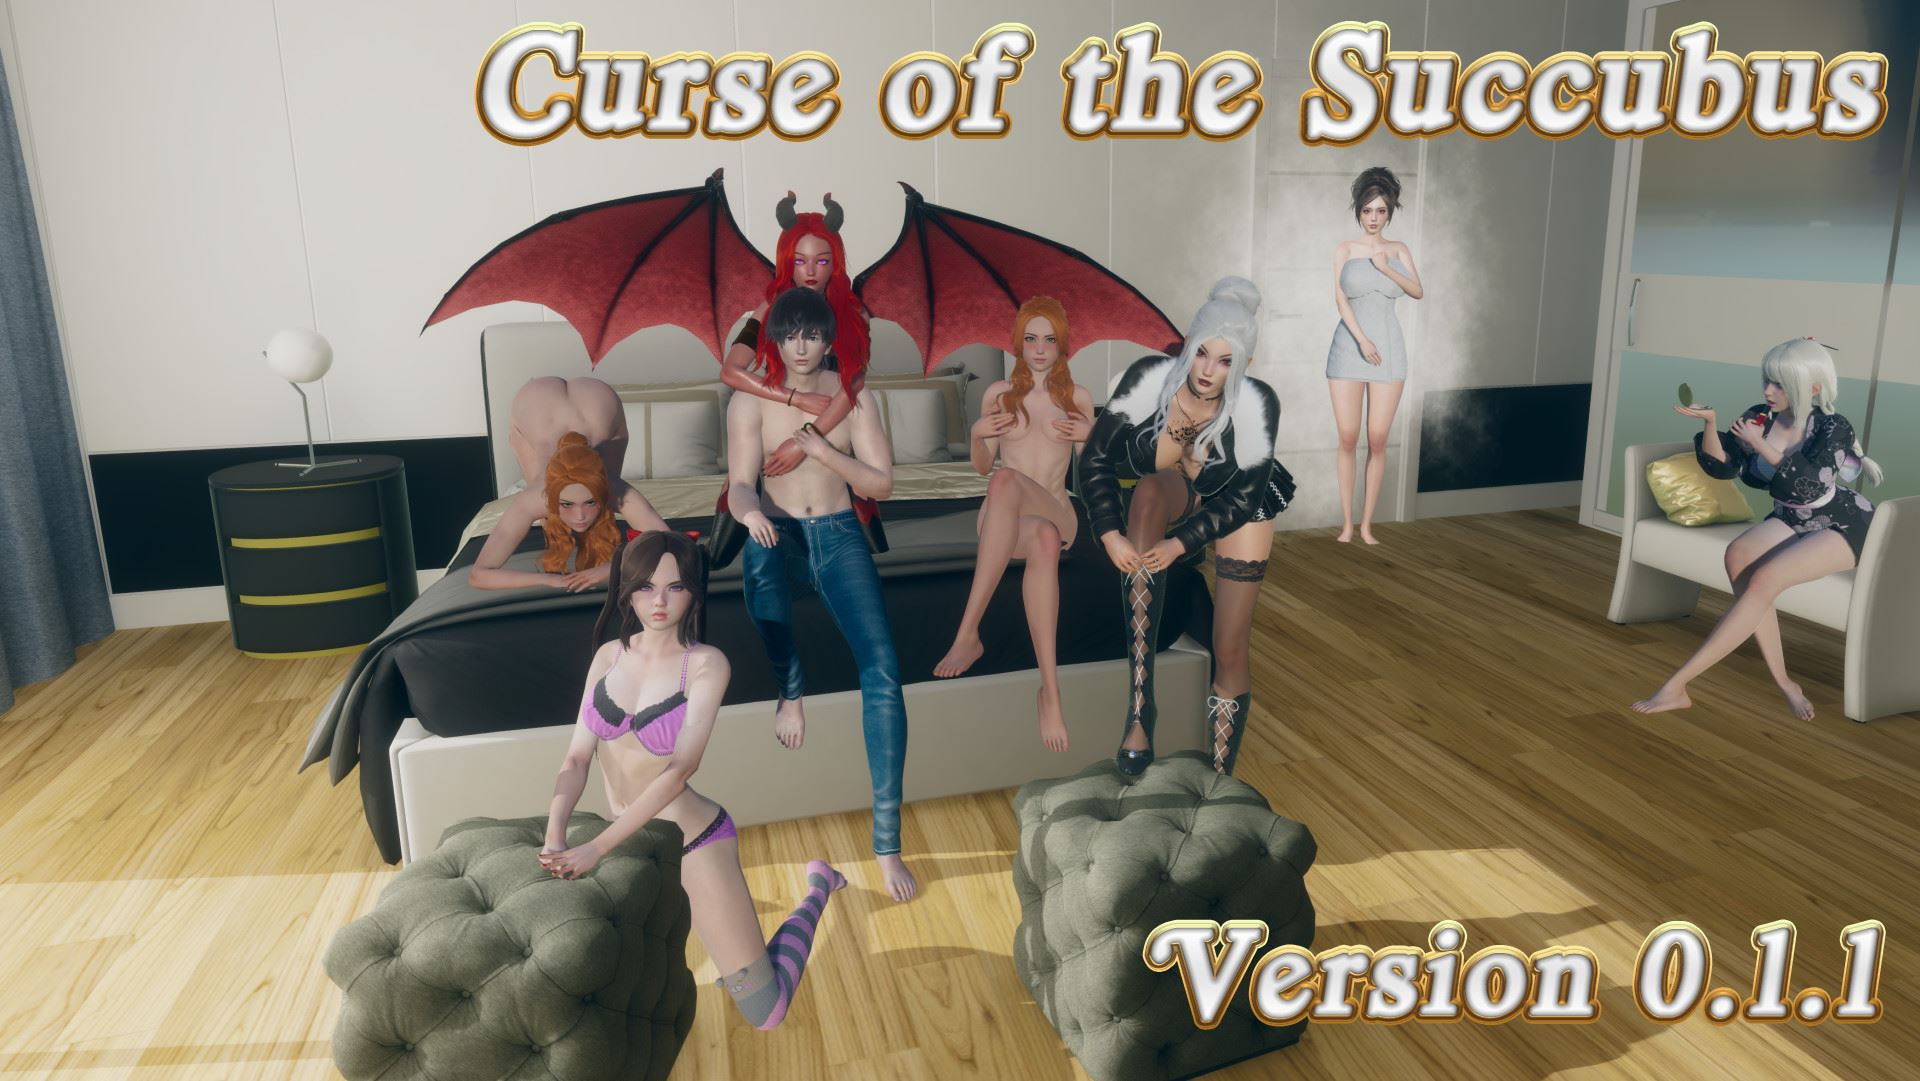 Curse of the Succubus [Ongoing] - Version: 0.1.1